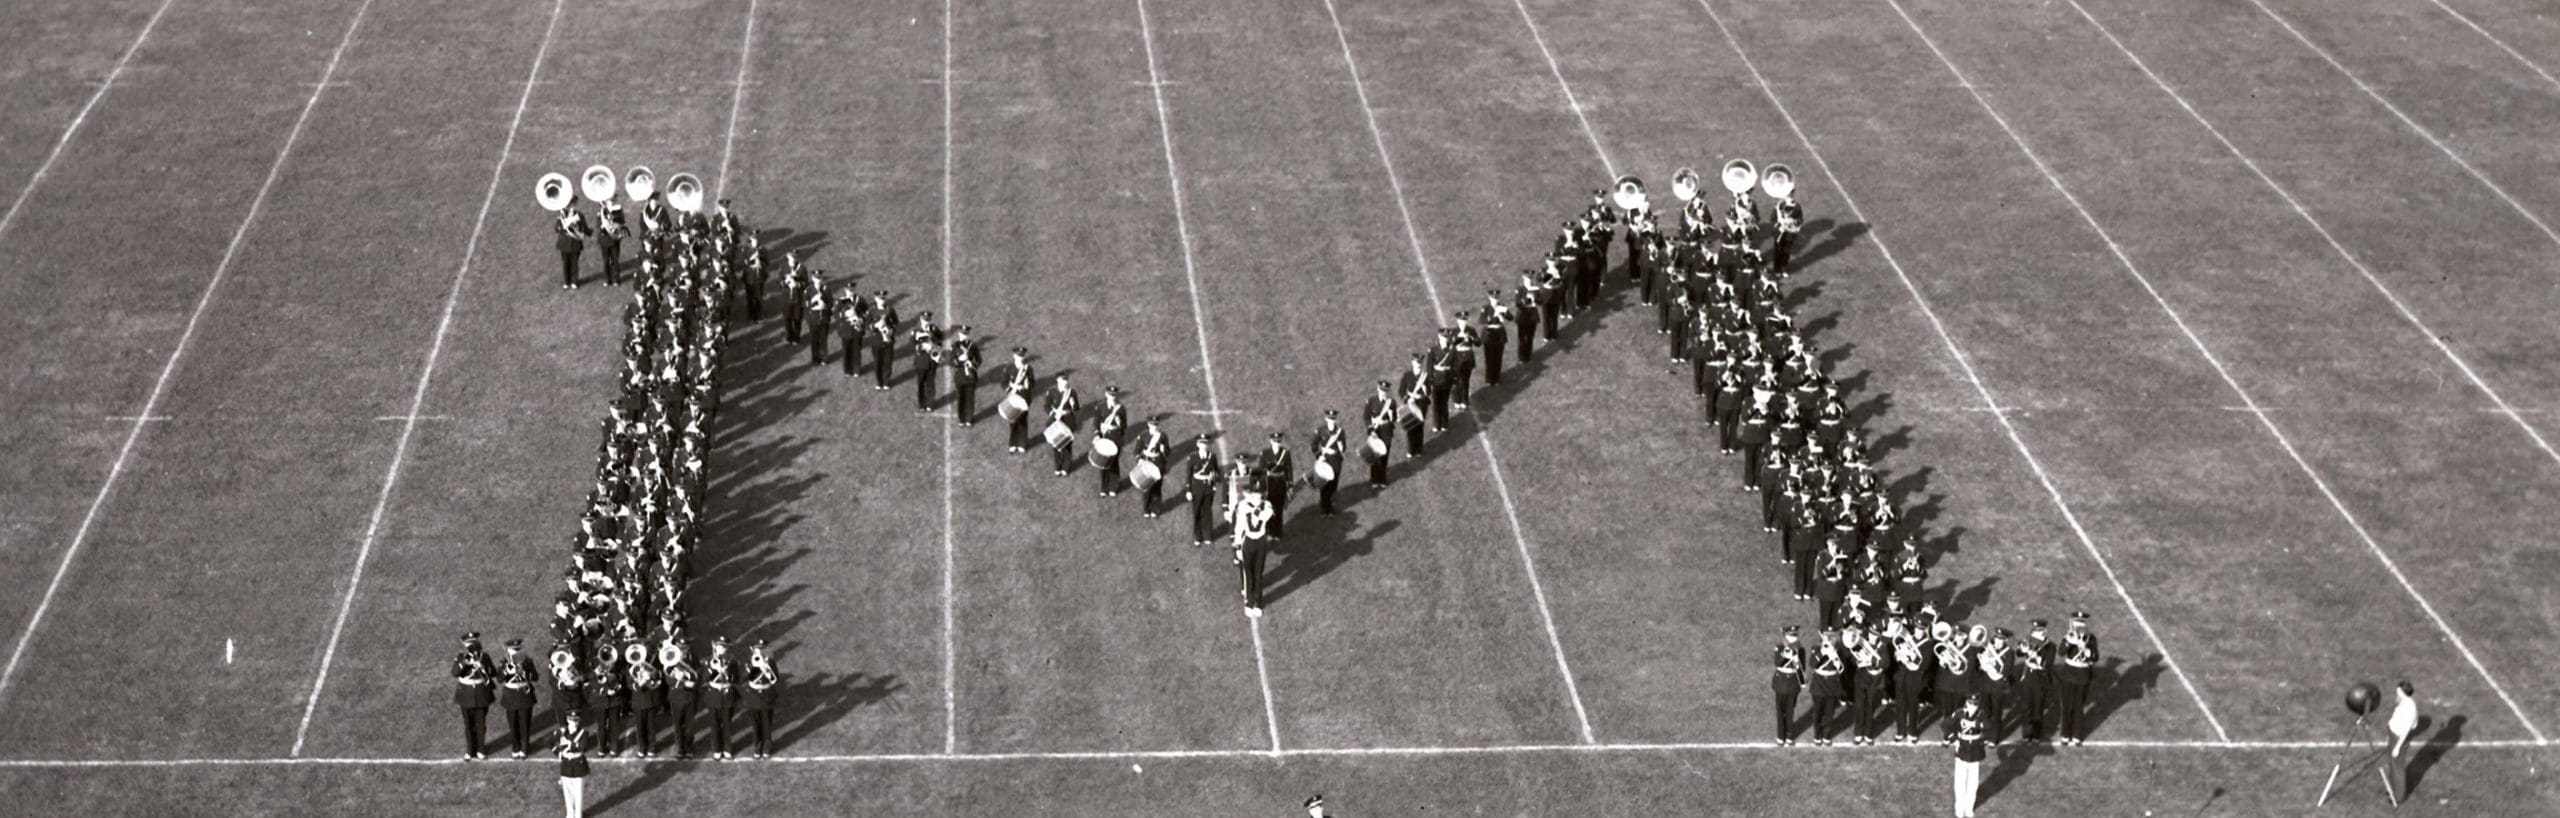 U-M Marching Band forming the Block M at the U-M vs. Michigan State football game on October 5, 1940.